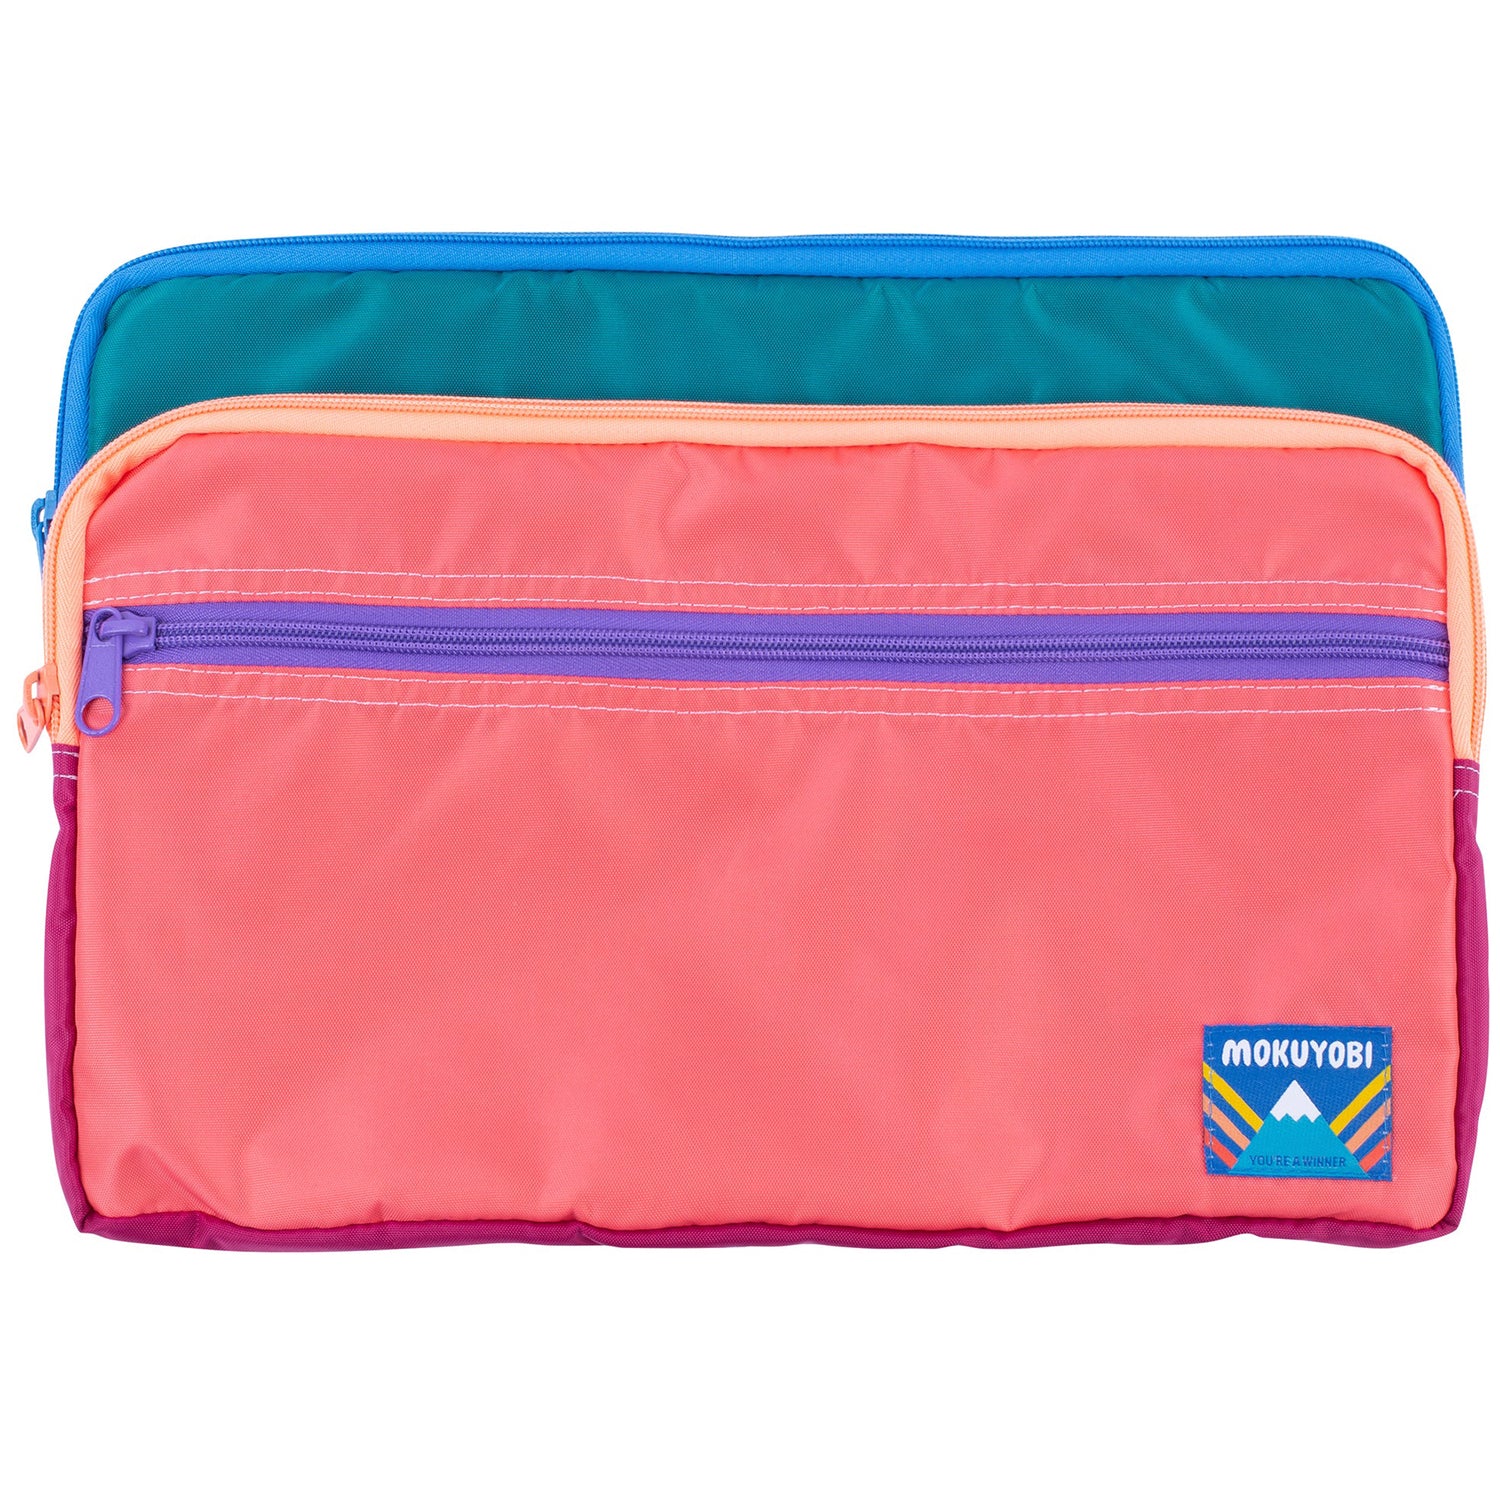 A colorful laptop case with zipper pockets